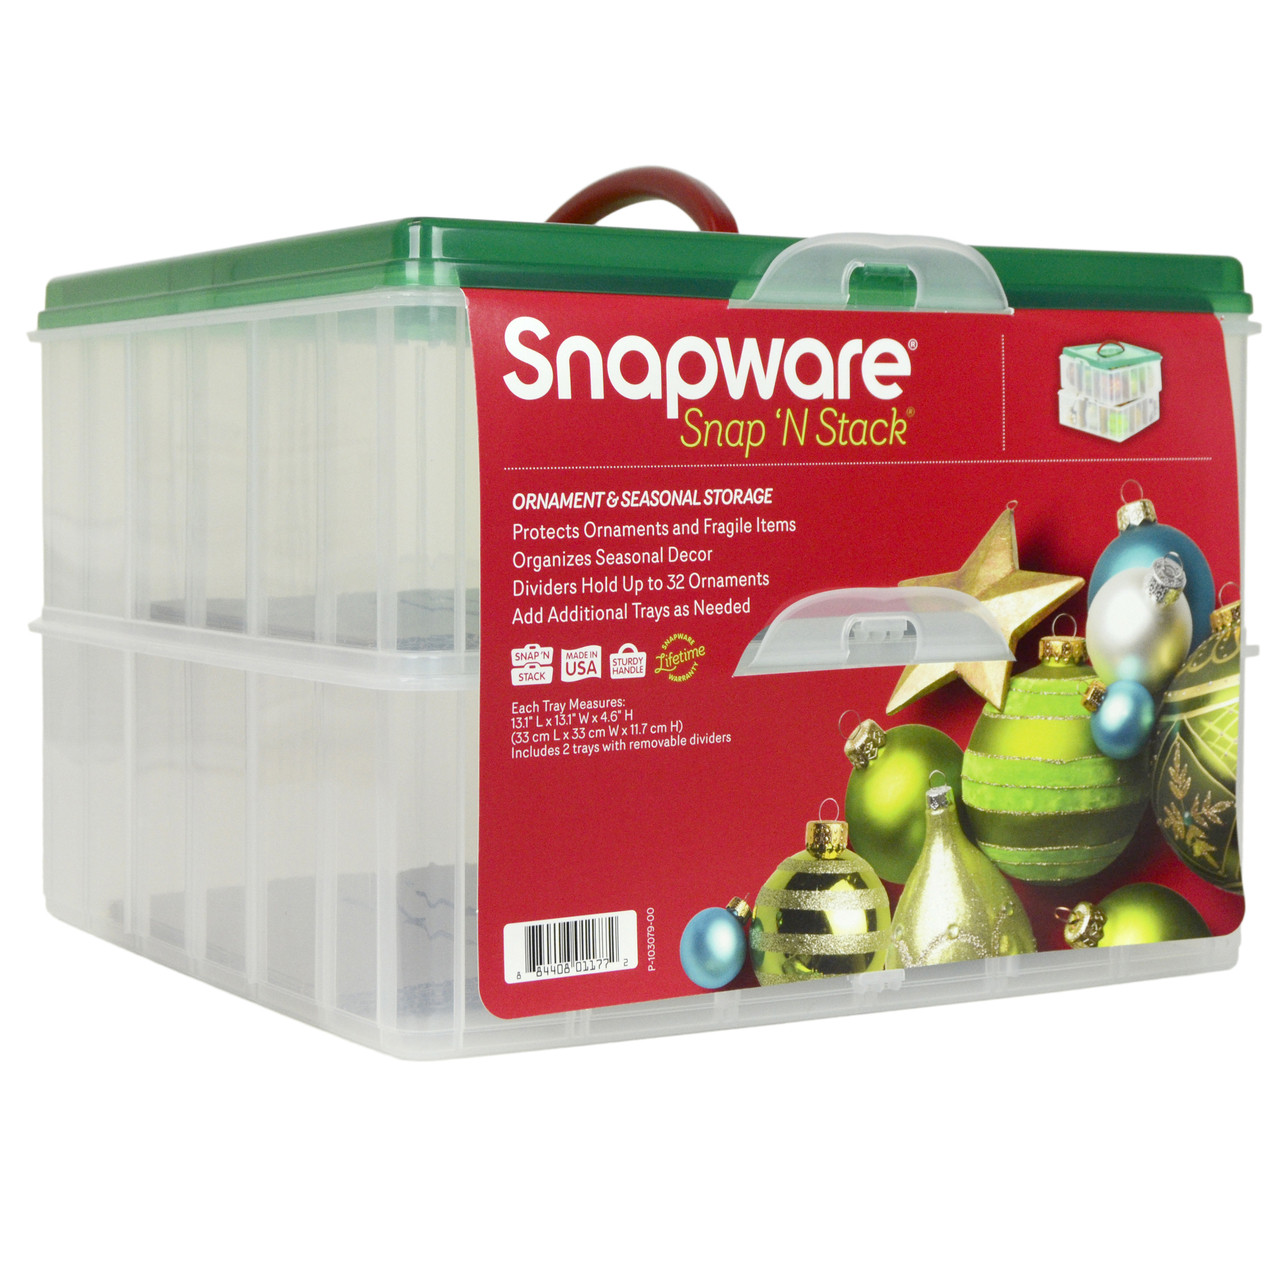 Snapware Ornament & Seasonal Storage Container For Free In